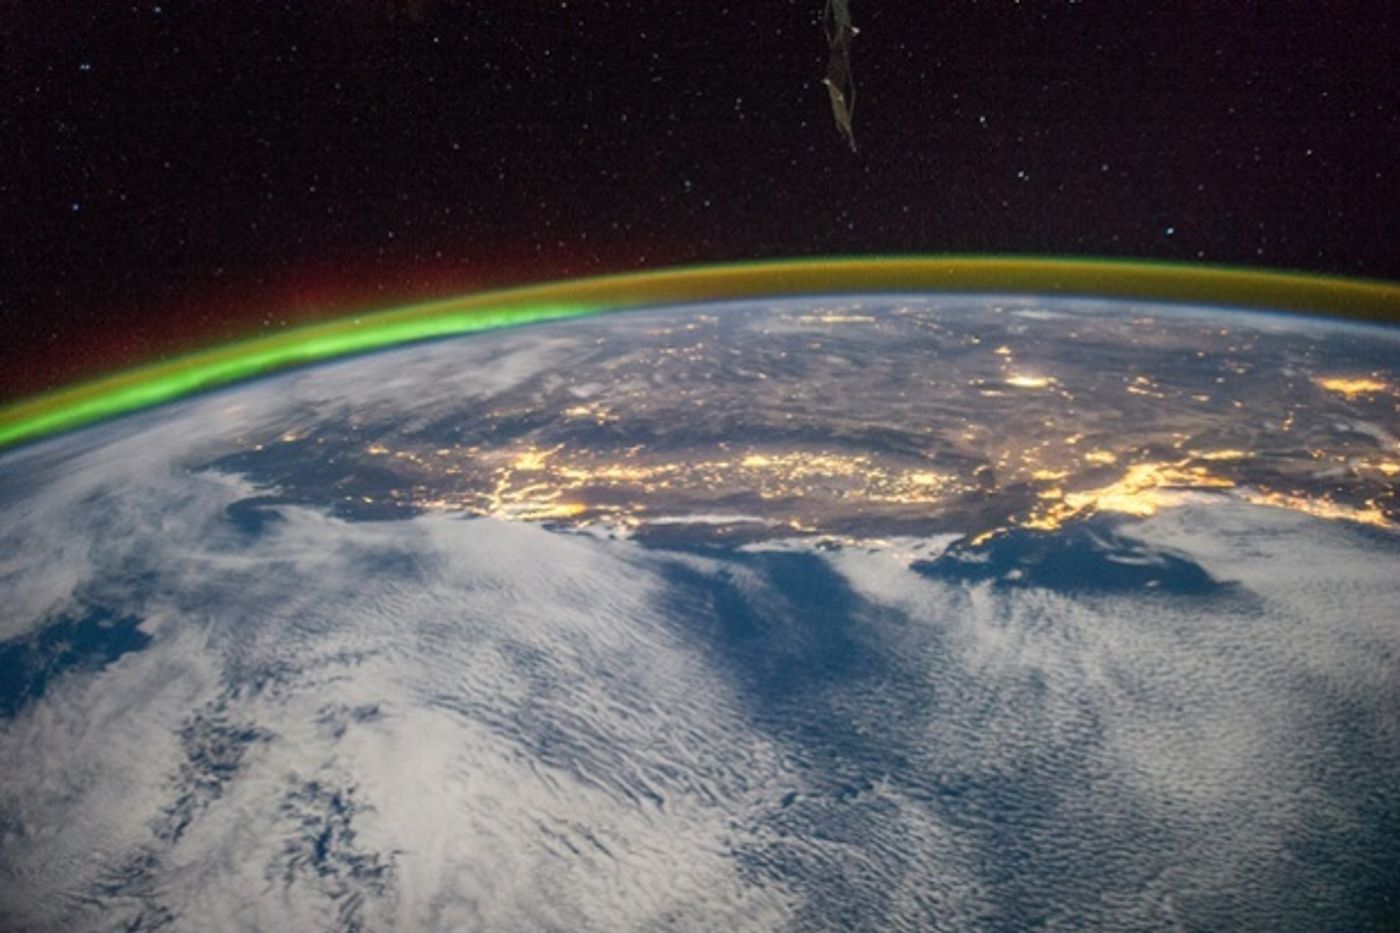 Night over Los Angeles, the Central Valley, and the Sierra Nevada, and Salt Lake City with a green aurora (left) on the horizon